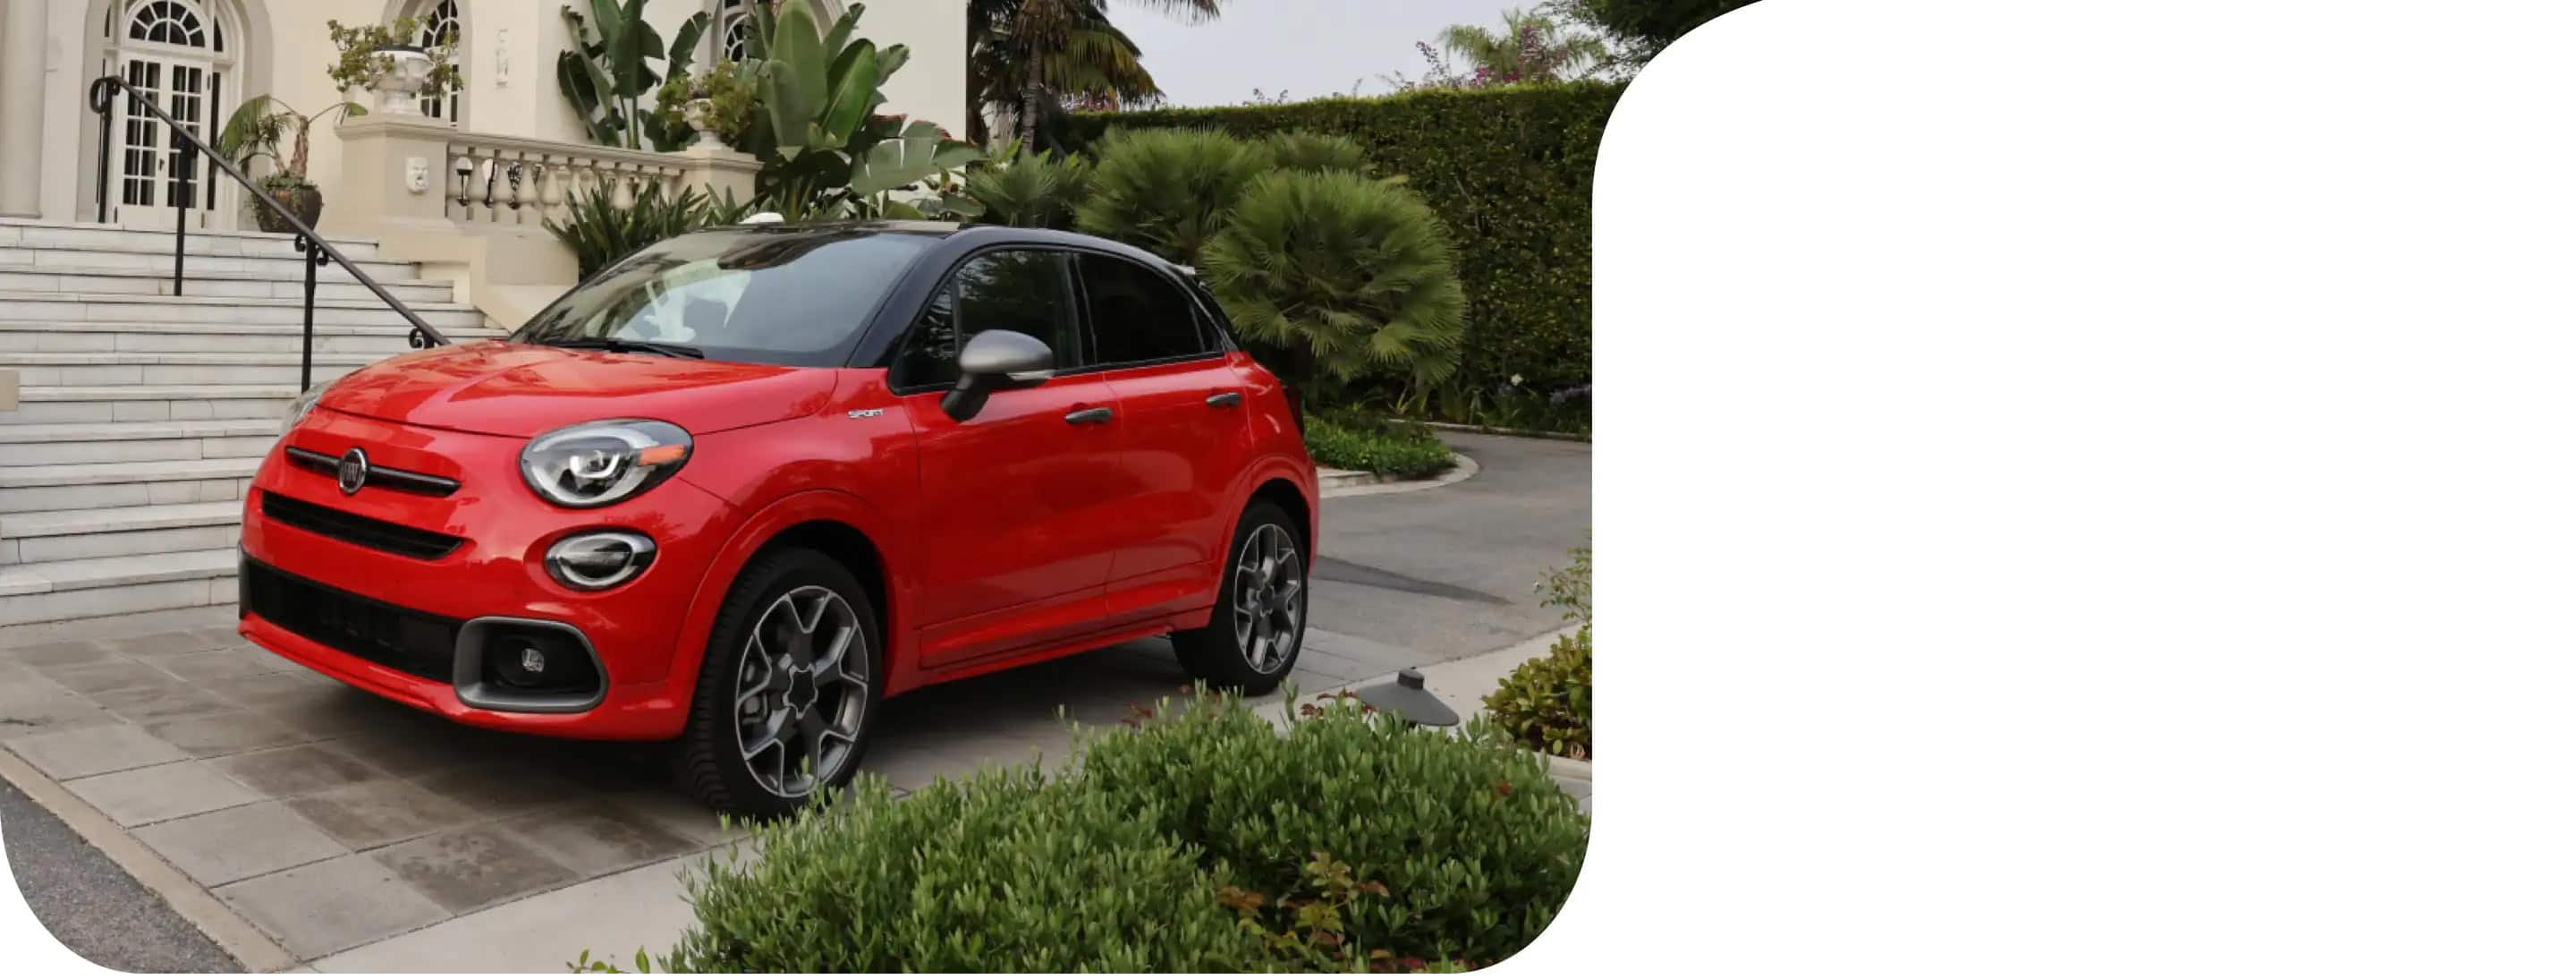 A three-quarter front view of a red 2021 Fiat 500X Sport parked next to an opulent home.